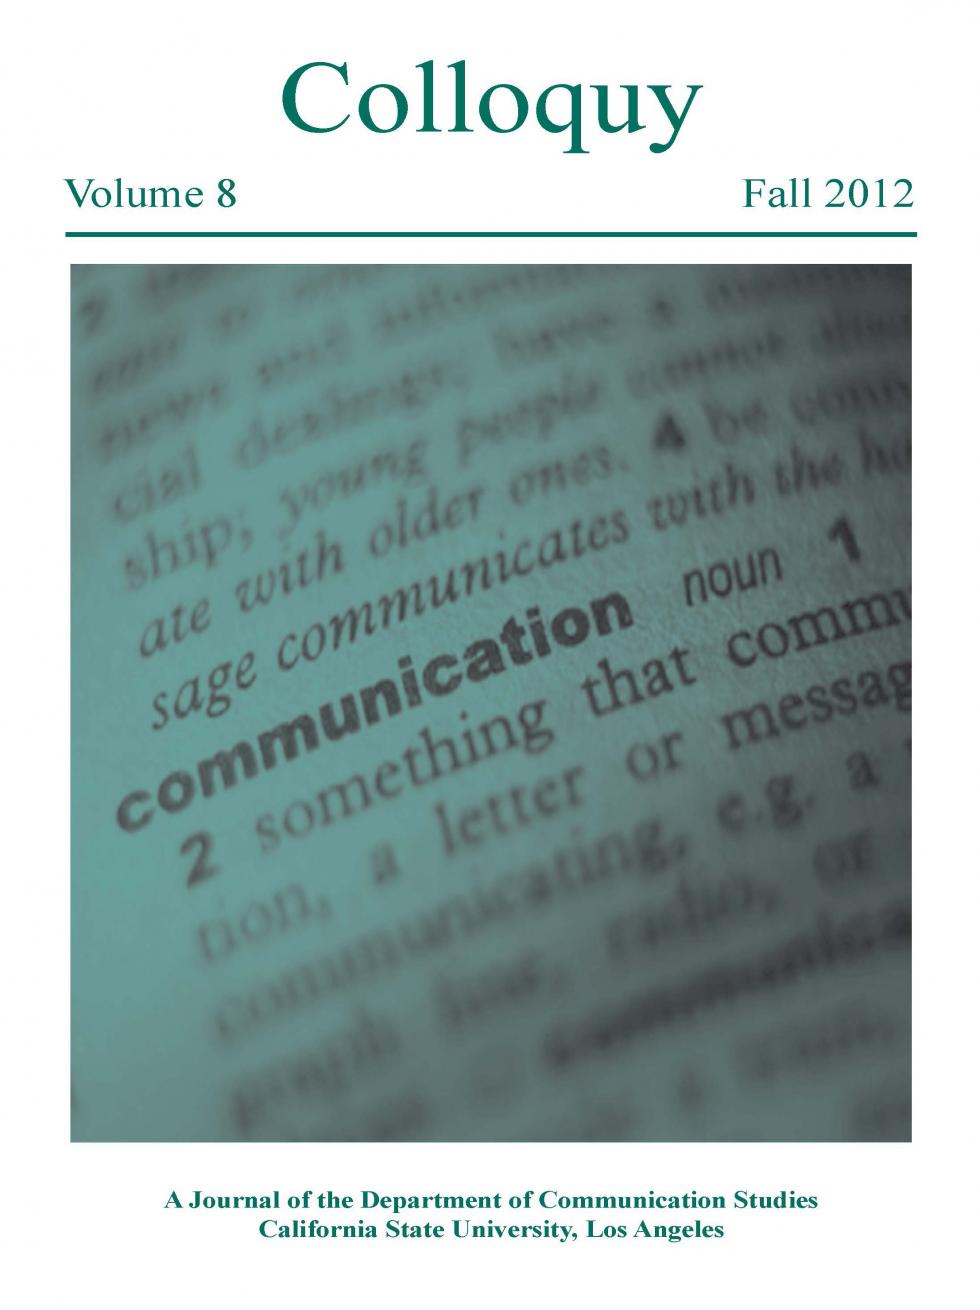 Link to 2012 issue of Colloquy